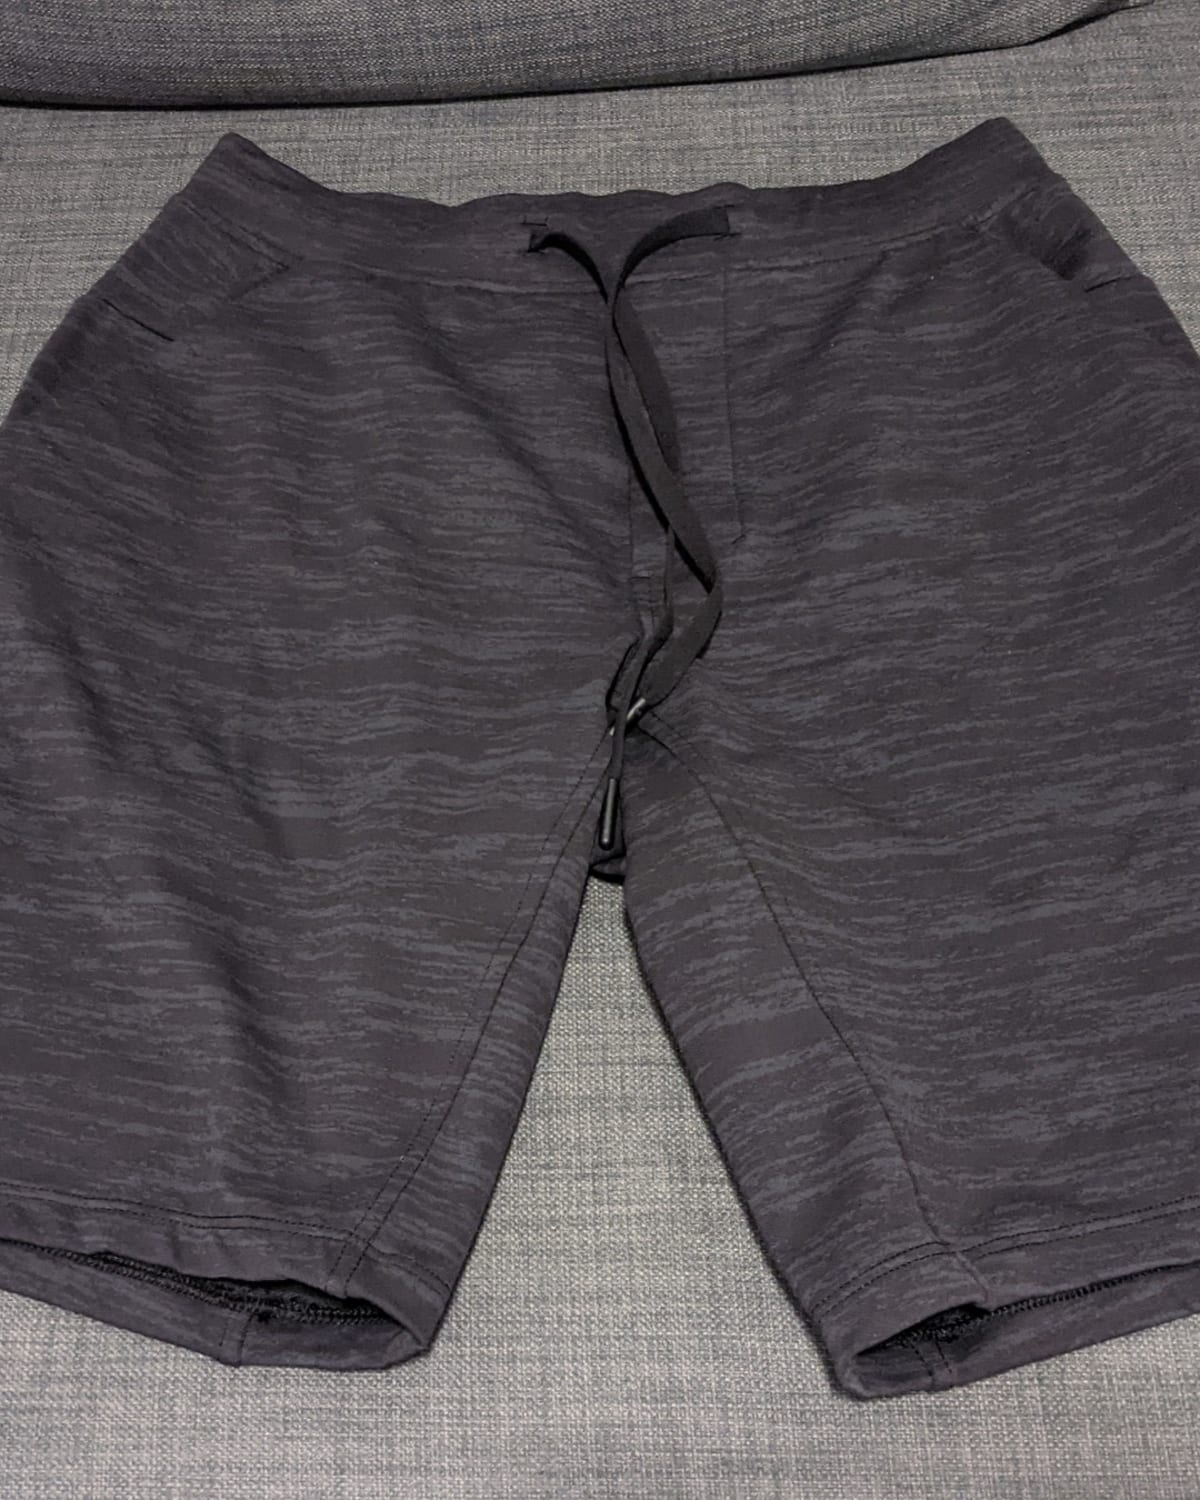 I bought this active pants from Lululemon in Australia as they are on ...